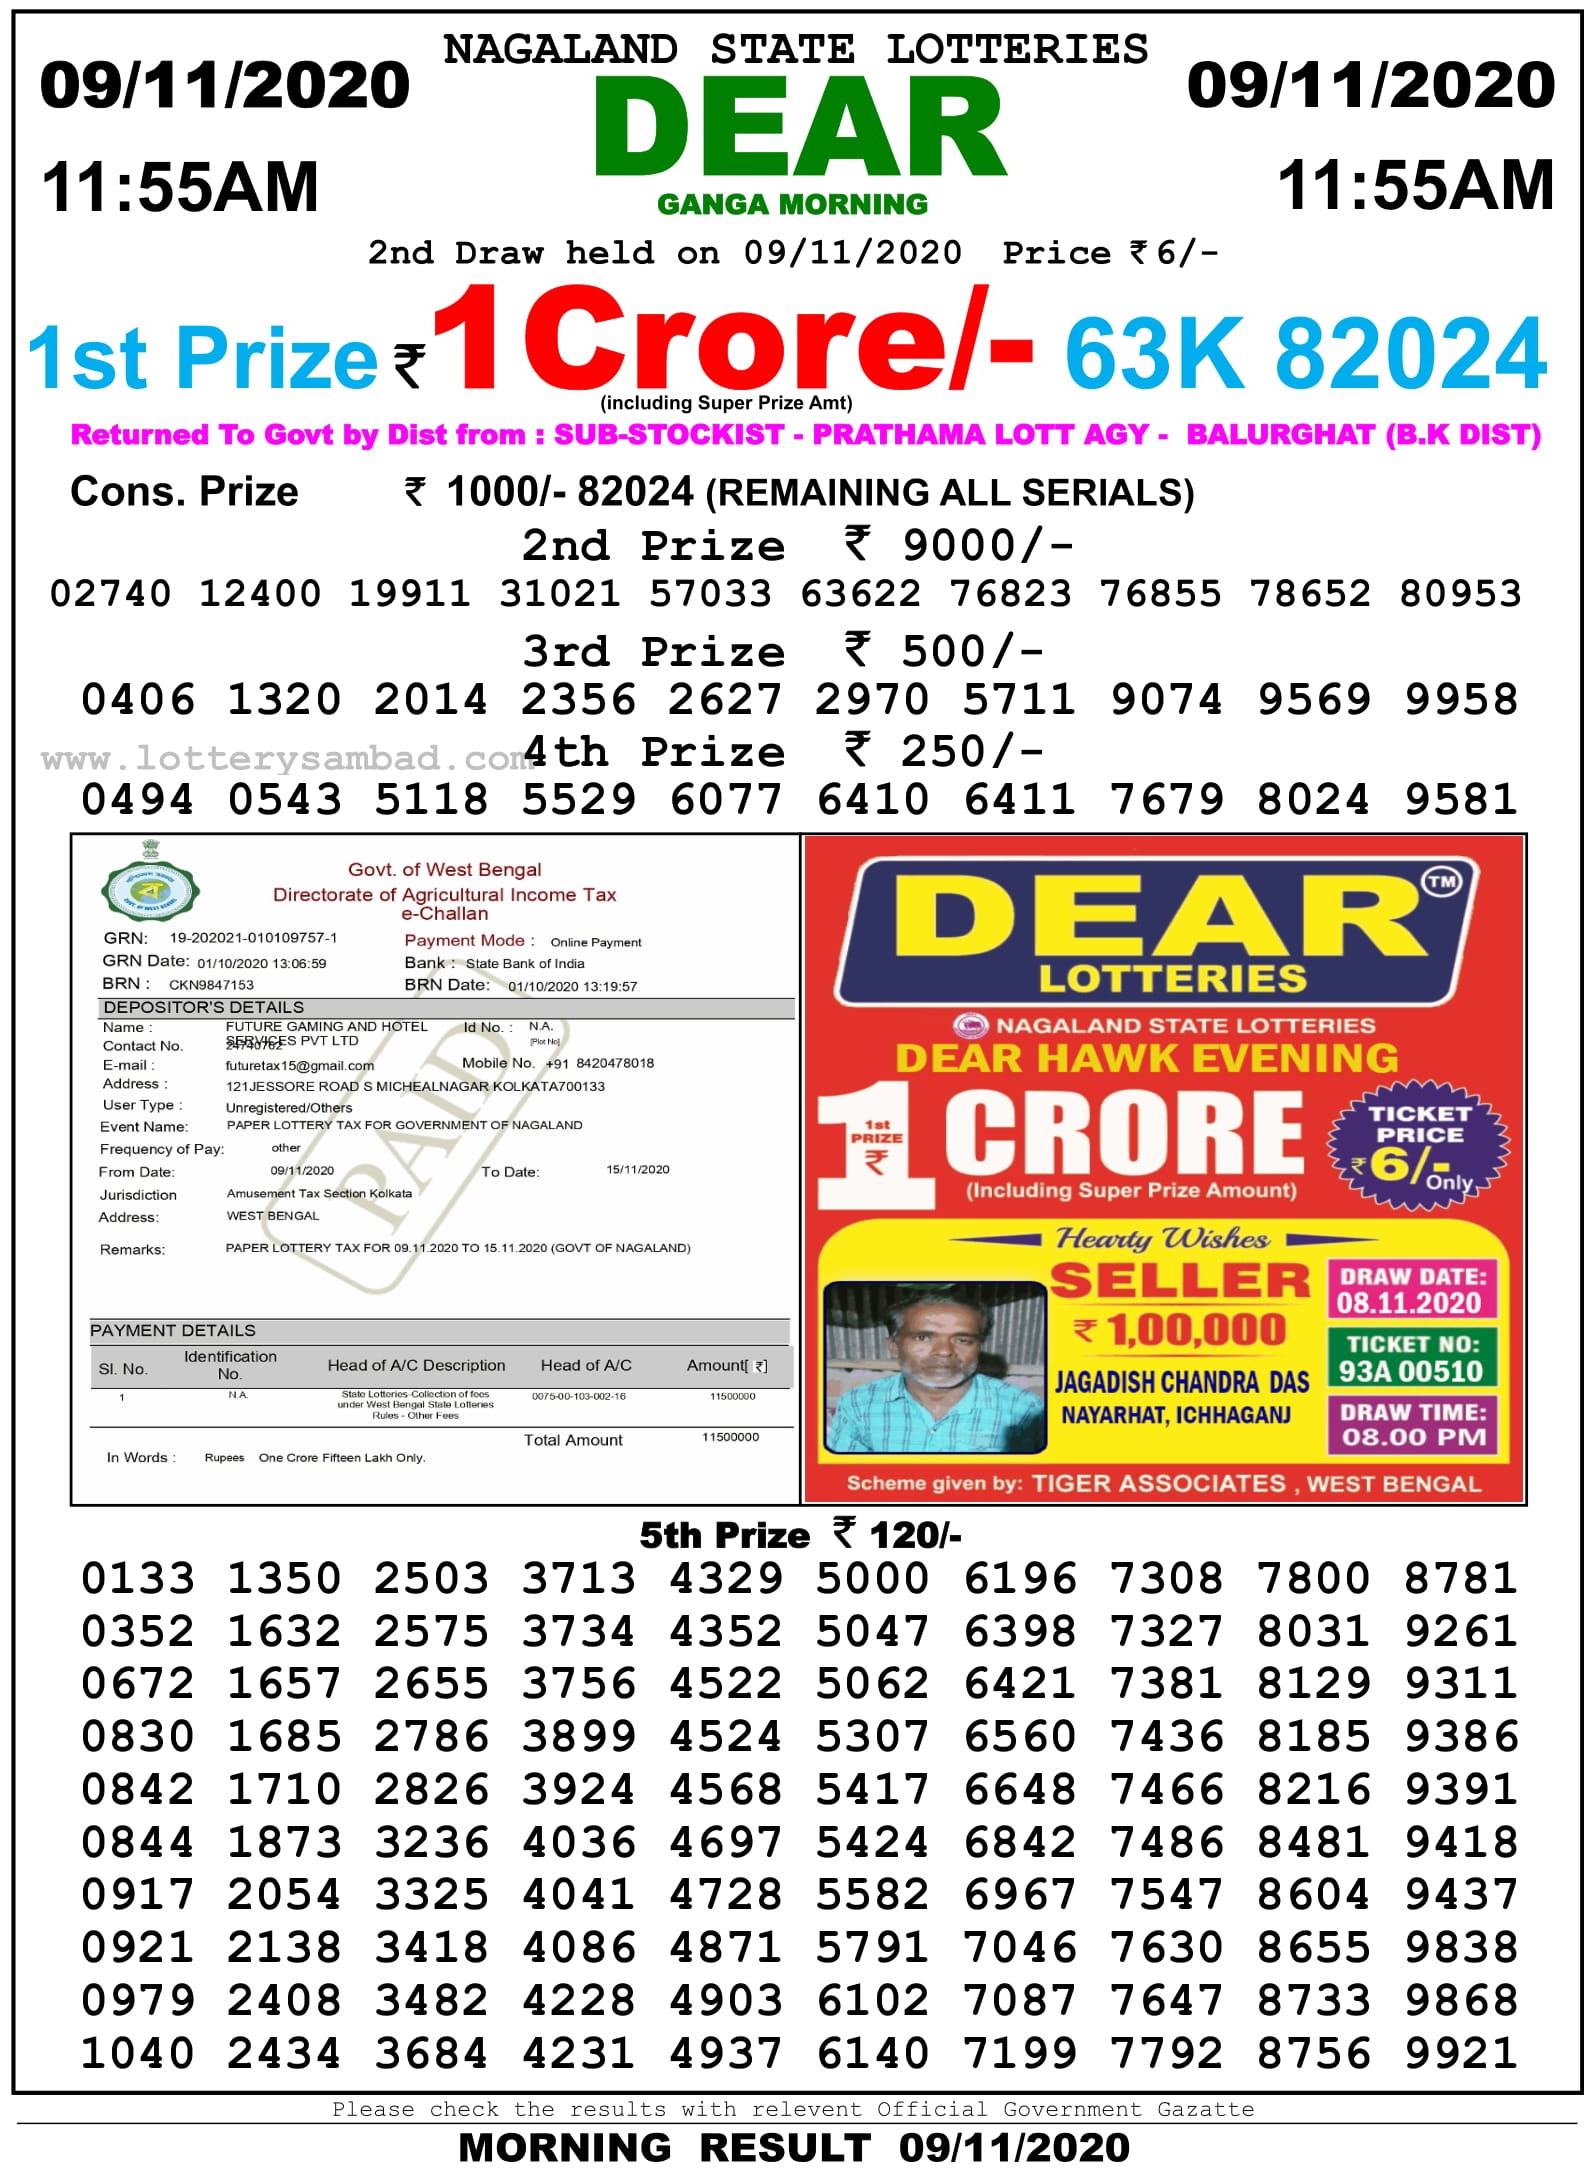 Sikkim State Lottery Result 11.55 Am 9.11.2020